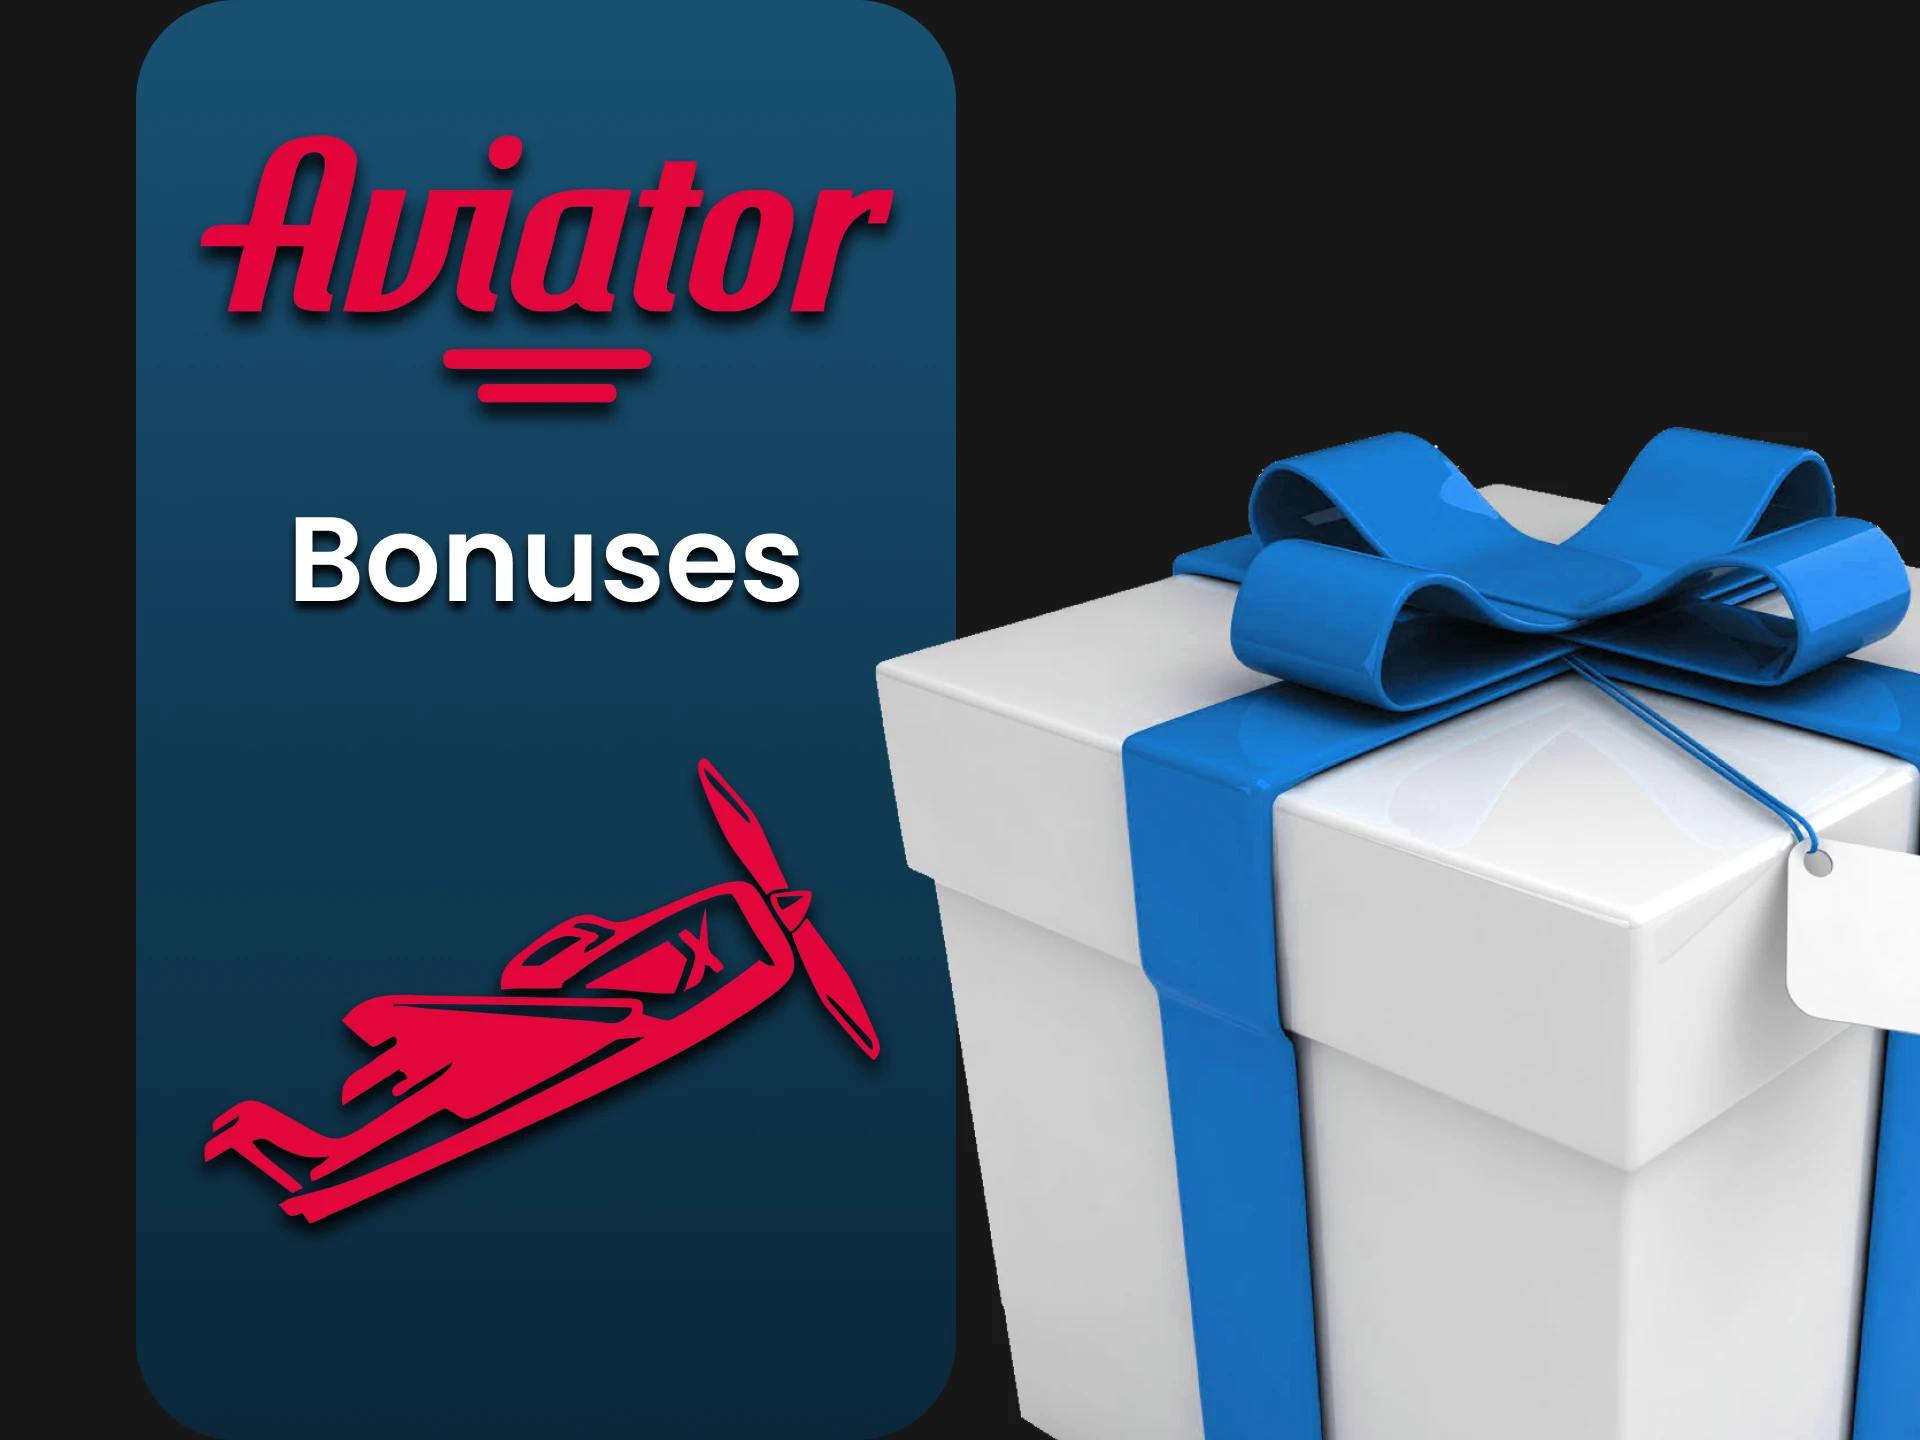 There are many bonuses for the Aviator game.